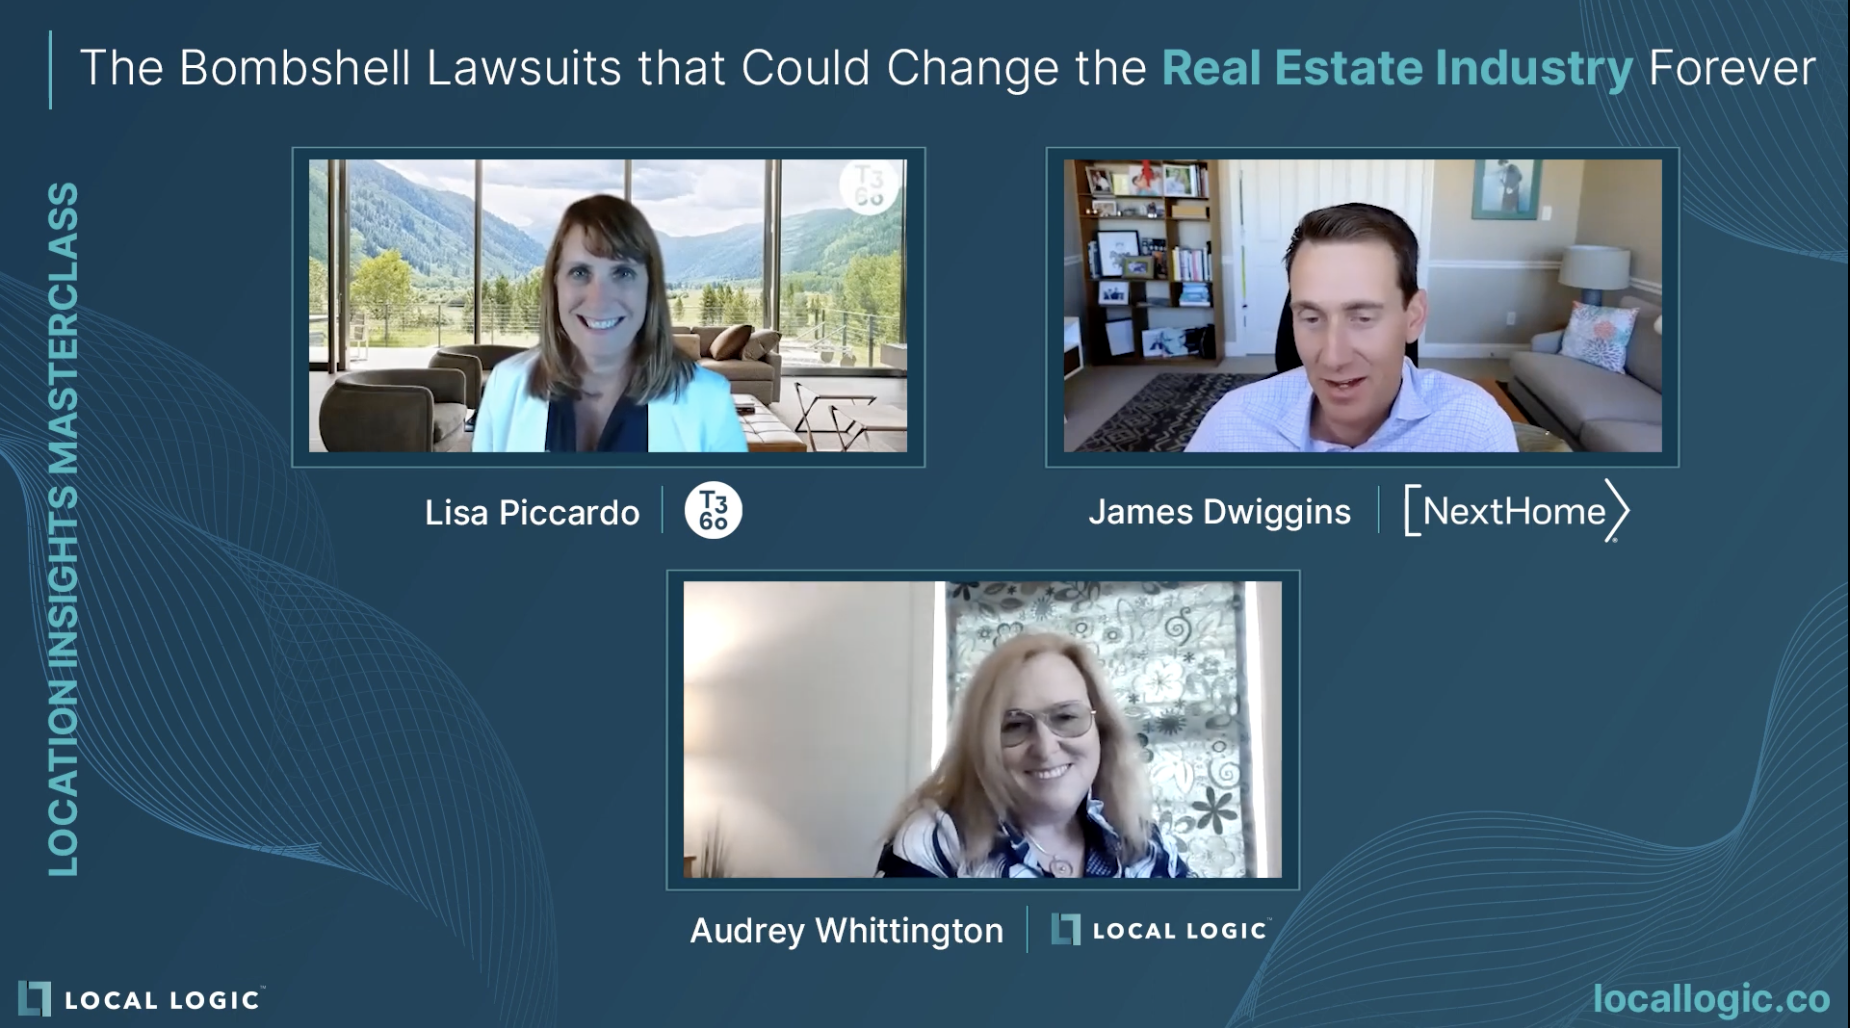 Promotional graphic to promote a webinar on compensation lawsuits featuring real estate leaders from NextHome (James Dwiggins), T3 Sixty (Lisa Piccardo), and Local Logic (Audrey Whittington)